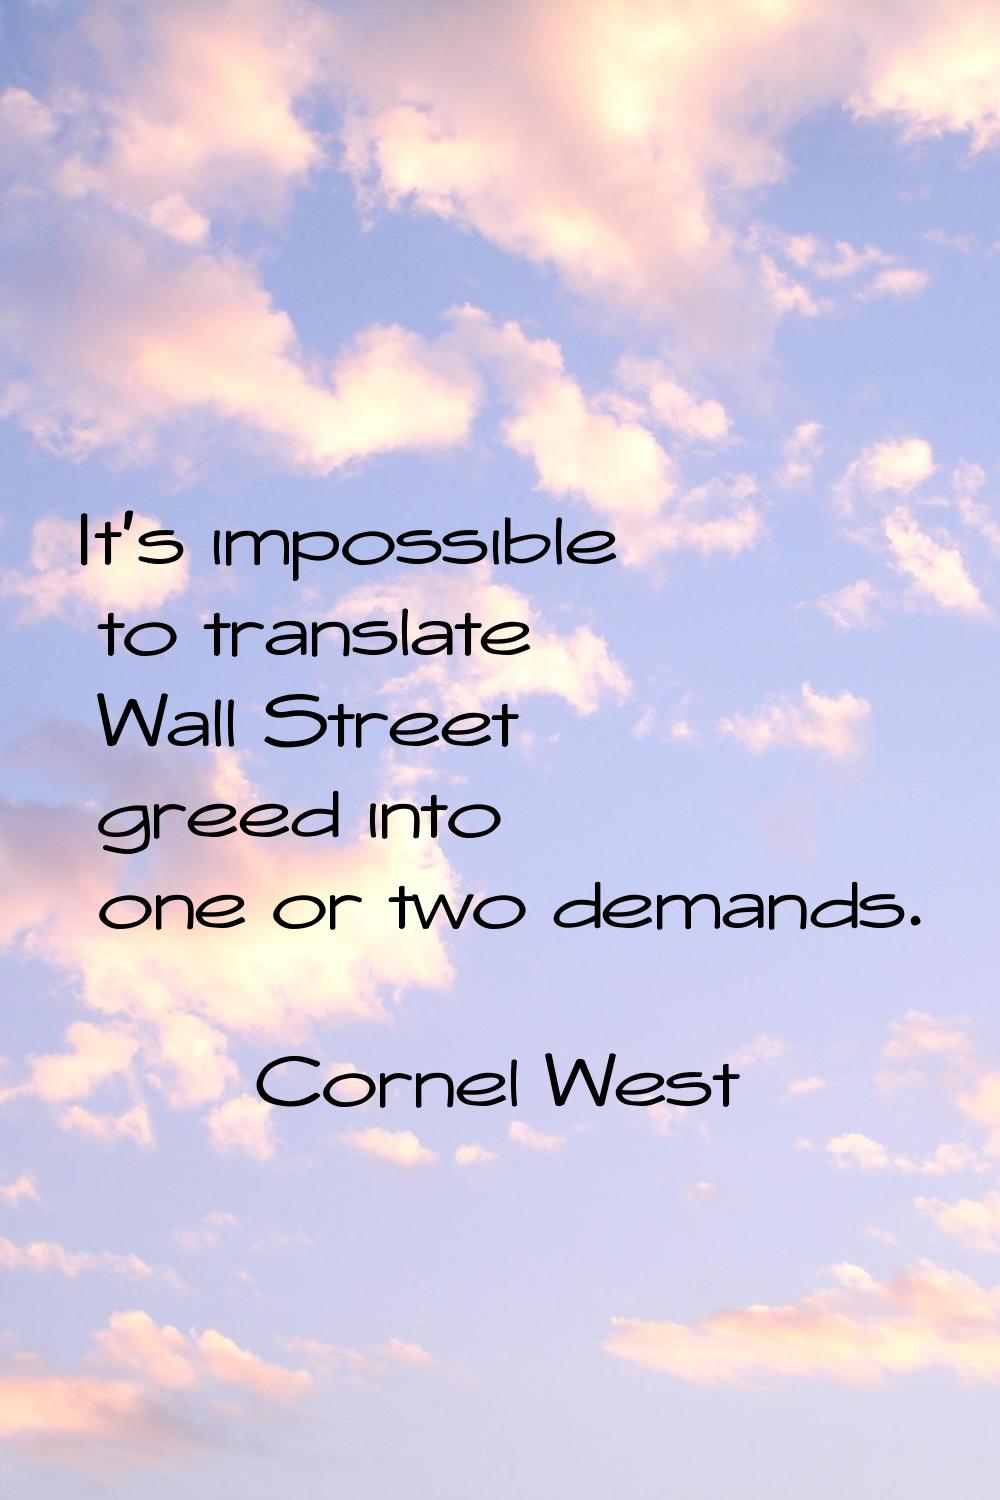 It's impossible to translate Wall Street greed into one or two demands.